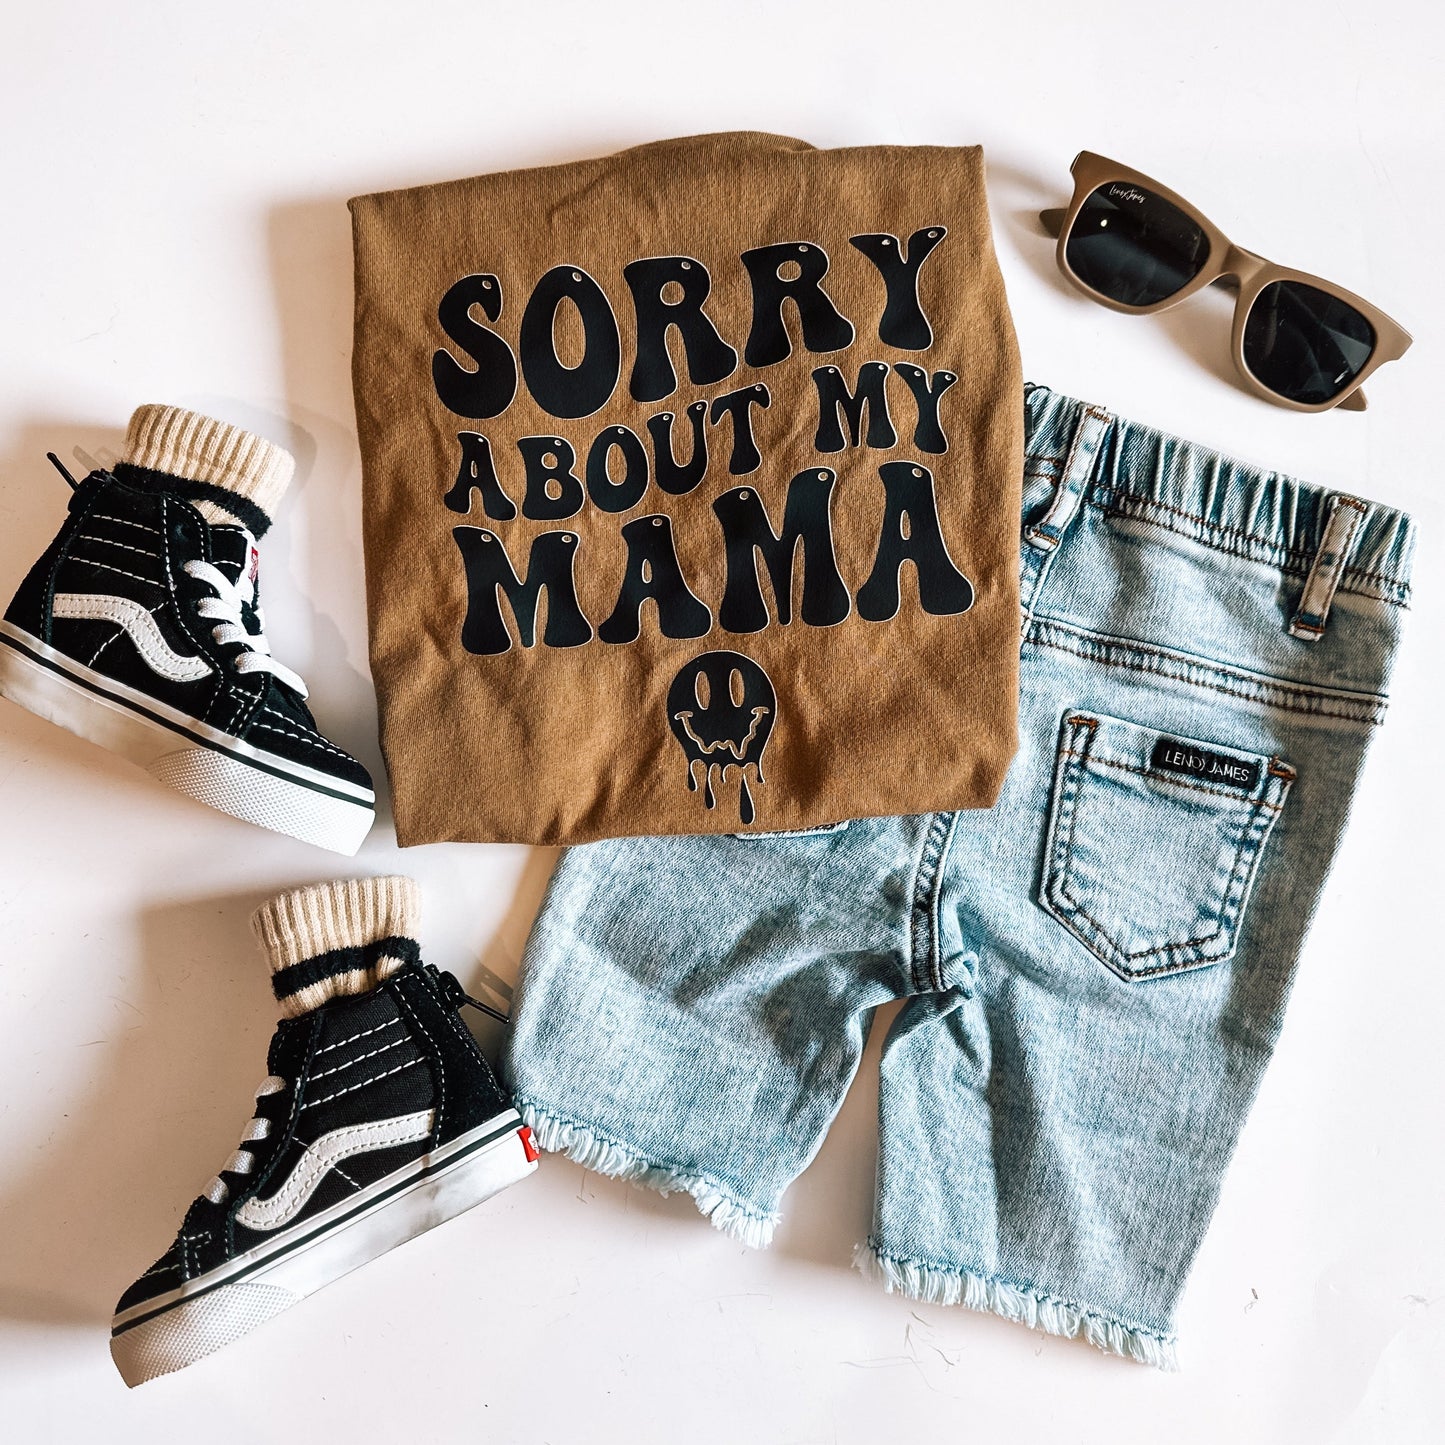 Sorry About my Mama  | Brown Graphic T-Shirt